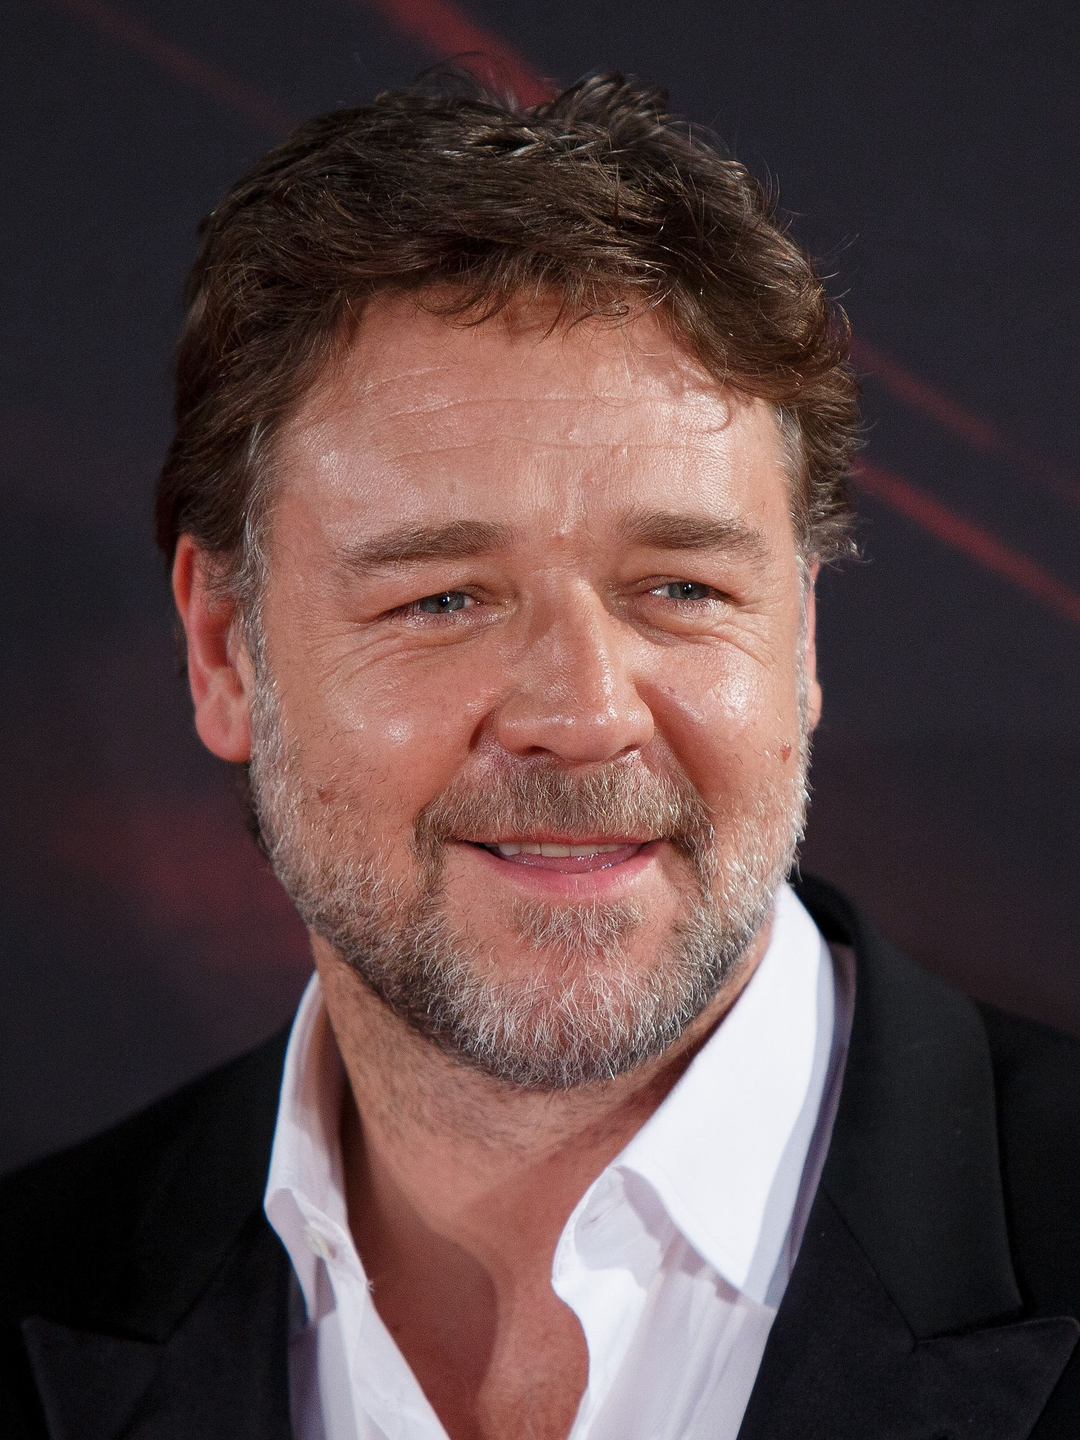 Russell Crowe dating history